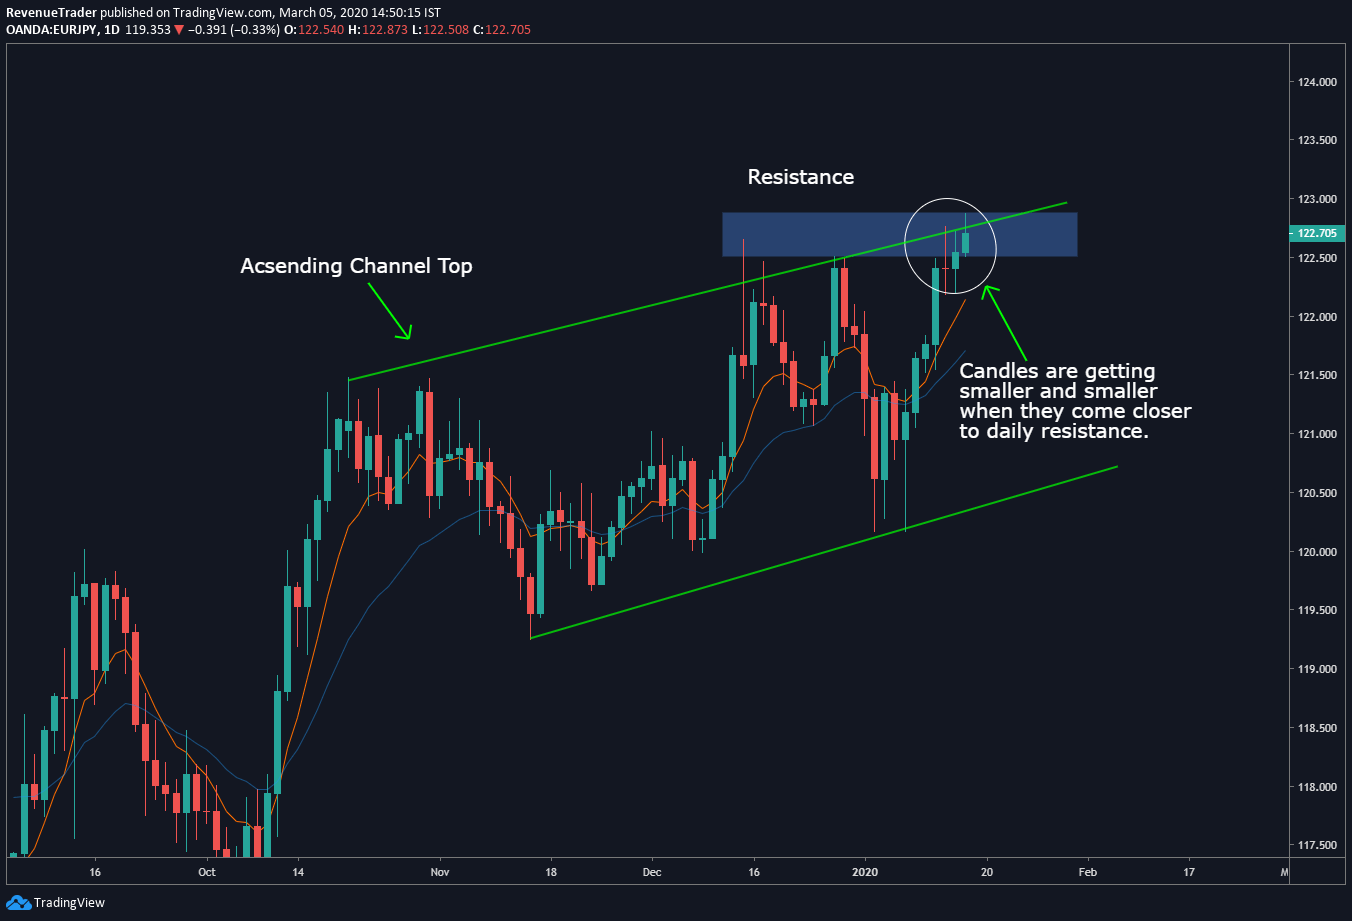 price is approaching to the resistance level